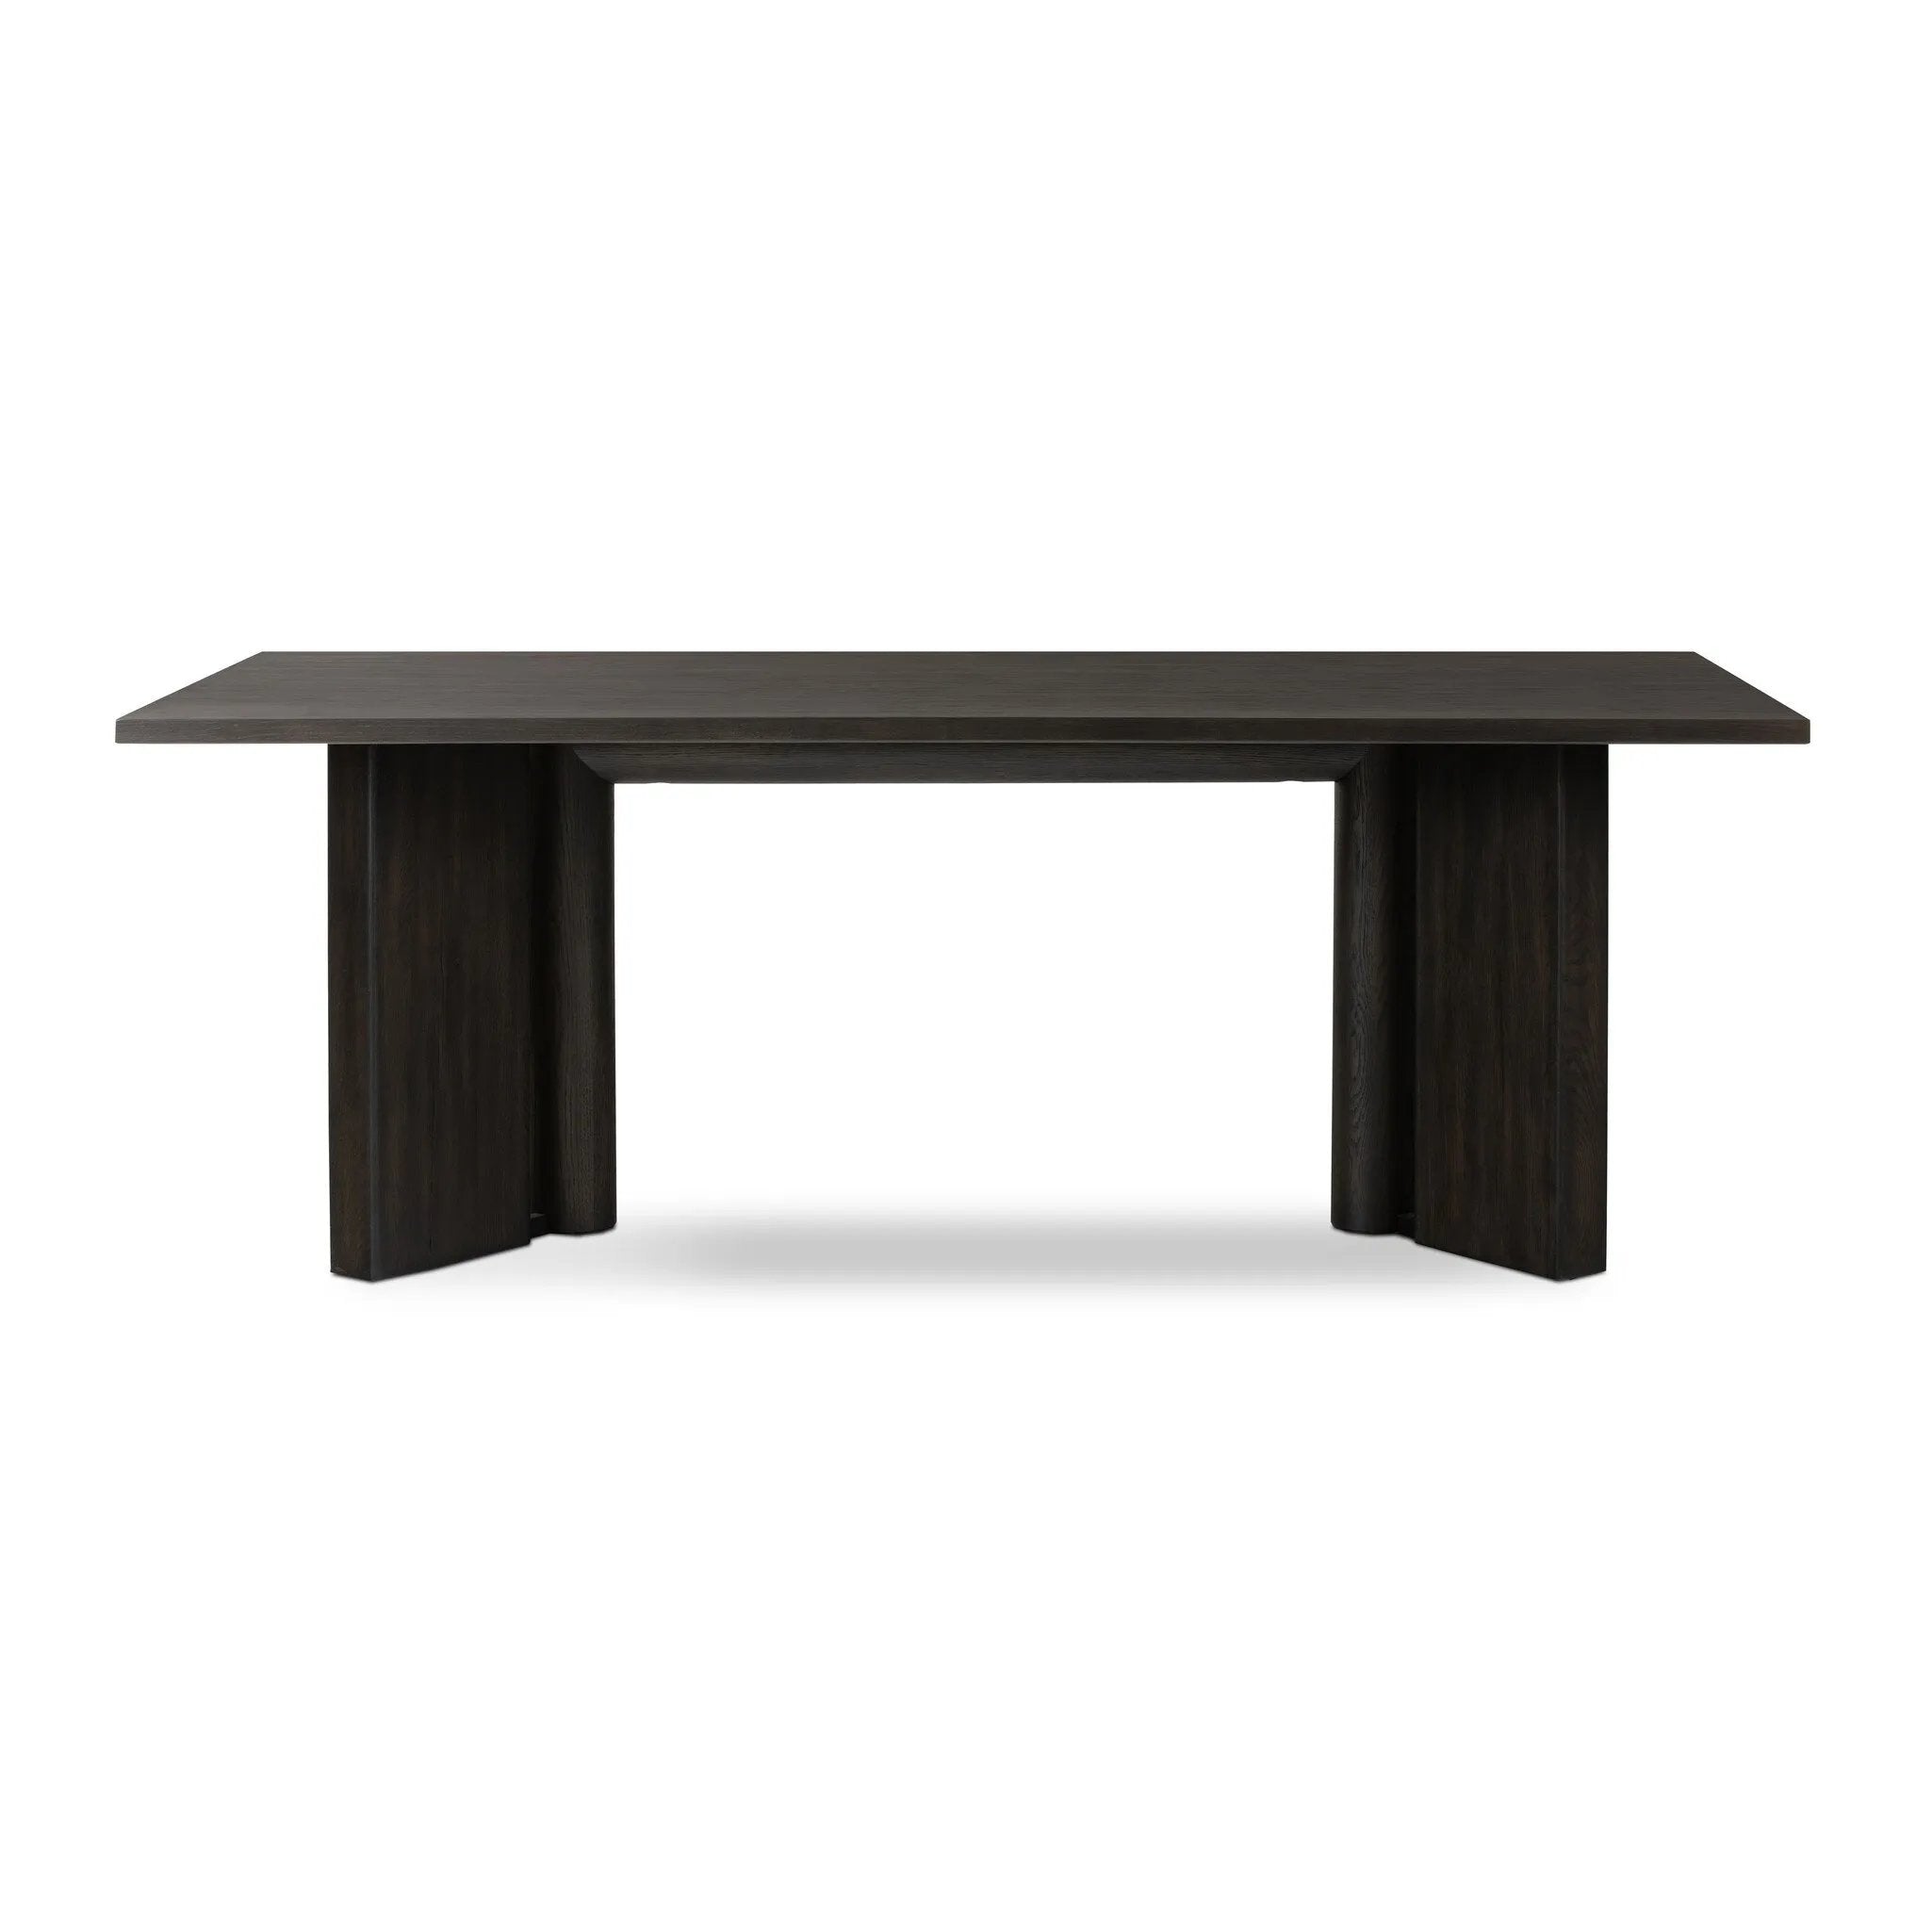 A smoked black finish brings character to this substantially sized dining table. Angled panel legs separated by a round cylinder craft a geometric look.Collection: Haide Amethyst Home provides interior design, new home construction design consulting, vintage area rugs, and lighting in the Washington metro area.